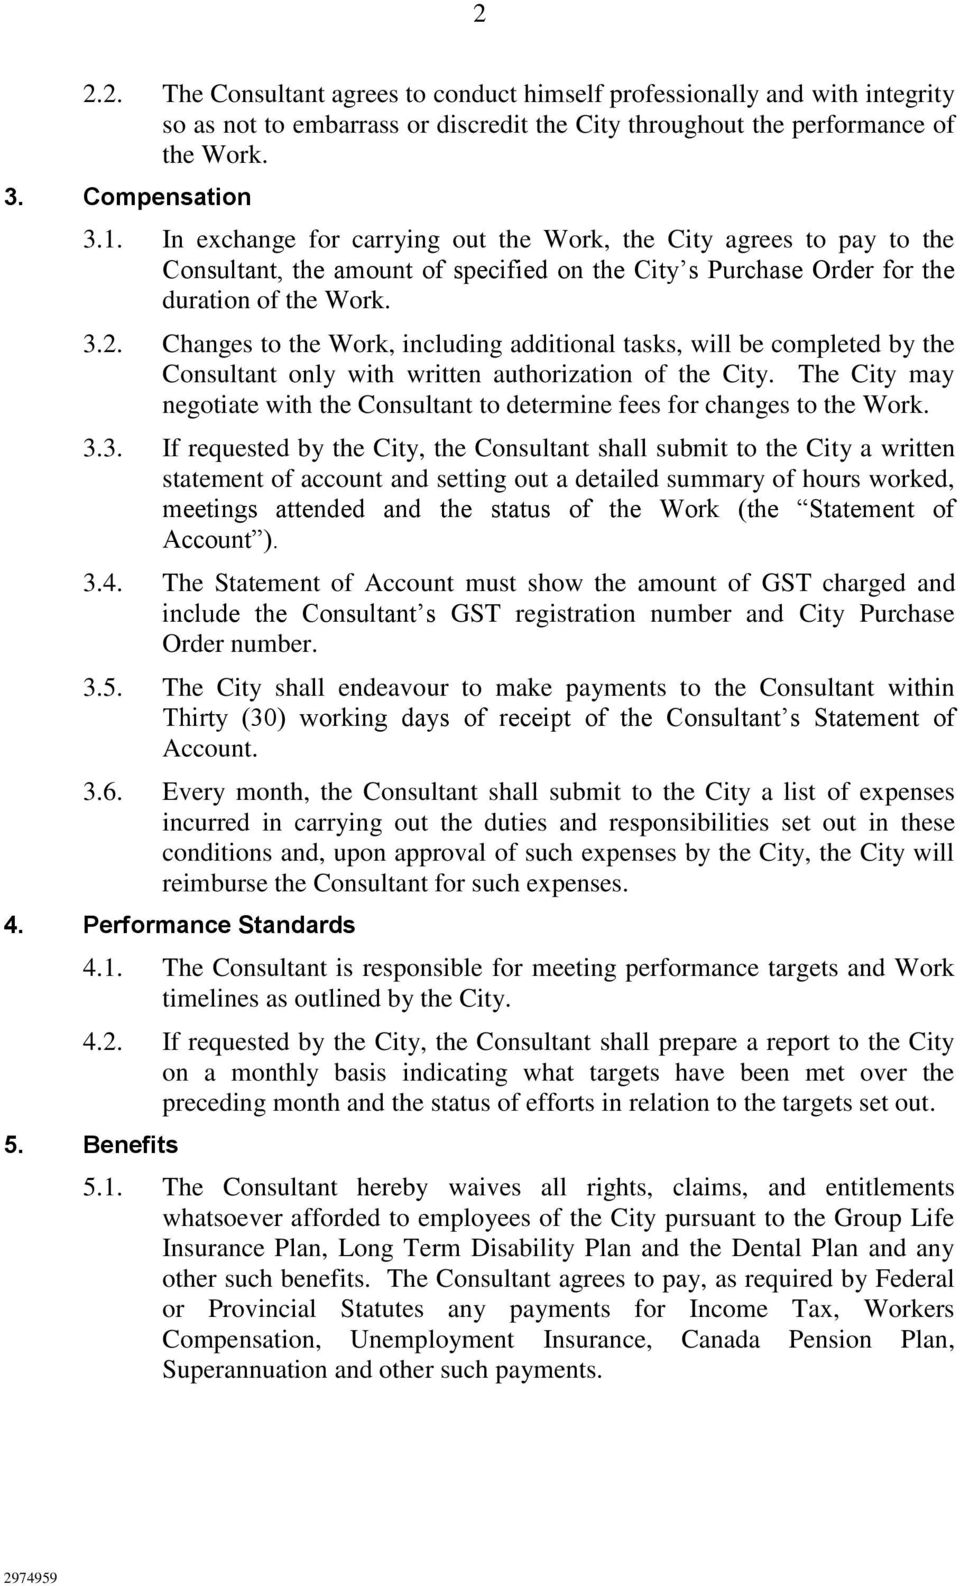 Changes to the Work, including additional tasks, will be completed by the Consultant only with written authorization of the City.